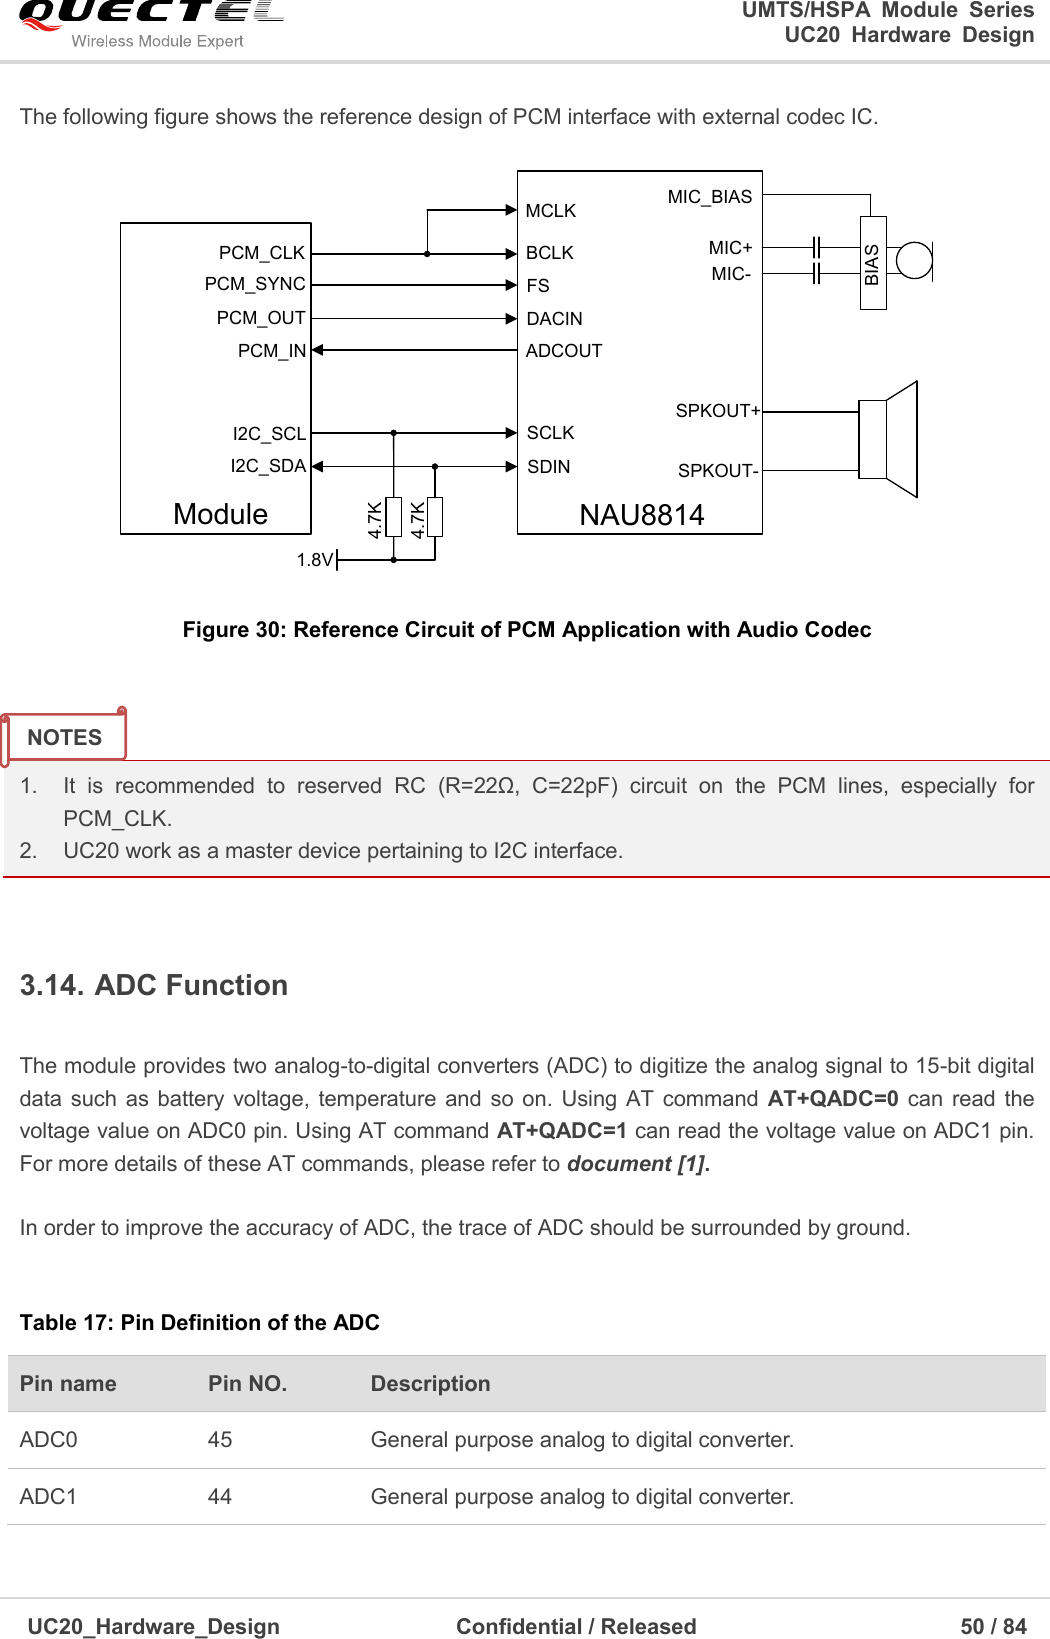                                                                                                                                               UMTS/HSPA  Module  Series                                                                 UC20  Hardware  Design  UC20_Hardware_Design                  Confidential / Released                            50 / 84     The following figure shows the reference design of PCM interface with external codec IC. PCM_INPCM_OUTPCM_SYNCPCM_CLKI2C_SCLI2C_SDANAU8814Module1.8V4.7K4.7KBCLKMCLKFSDACINADCOUTSCLKSDINBIASMIC_BIASMIC+MIC-SPKOUT+SPKOUT- Figure 30: Reference Circuit of PCM Application with Audio Codec   1.    It  is  recommended  to  reserved  RC  (R=22Ω,  C=22pF)  circuit  on  the  PCM  lines,  especially  for   PCM_CLK. 2.    UC20 work as a master device pertaining to I2C interface.  3.14. ADC Function  The module provides two analog-to-digital converters (ADC) to digitize the analog signal to 15-bit digital data such  as battery voltage, temperature and so  on. Using AT  command  AT+QADC=0 can  read the voltage value on ADC0 pin. Using AT command AT+QADC=1 can read the voltage value on ADC1 pin. For more details of these AT commands, please refer to document [1].    In order to improve the accuracy of ADC, the trace of ADC should be surrounded by ground.    Table 17: Pin Definition of the ADC   Pin name Pin NO. Description ADC0 45 General purpose analog to digital converter. ADC1 44 General purpose analog to digital converter.  NOTES 